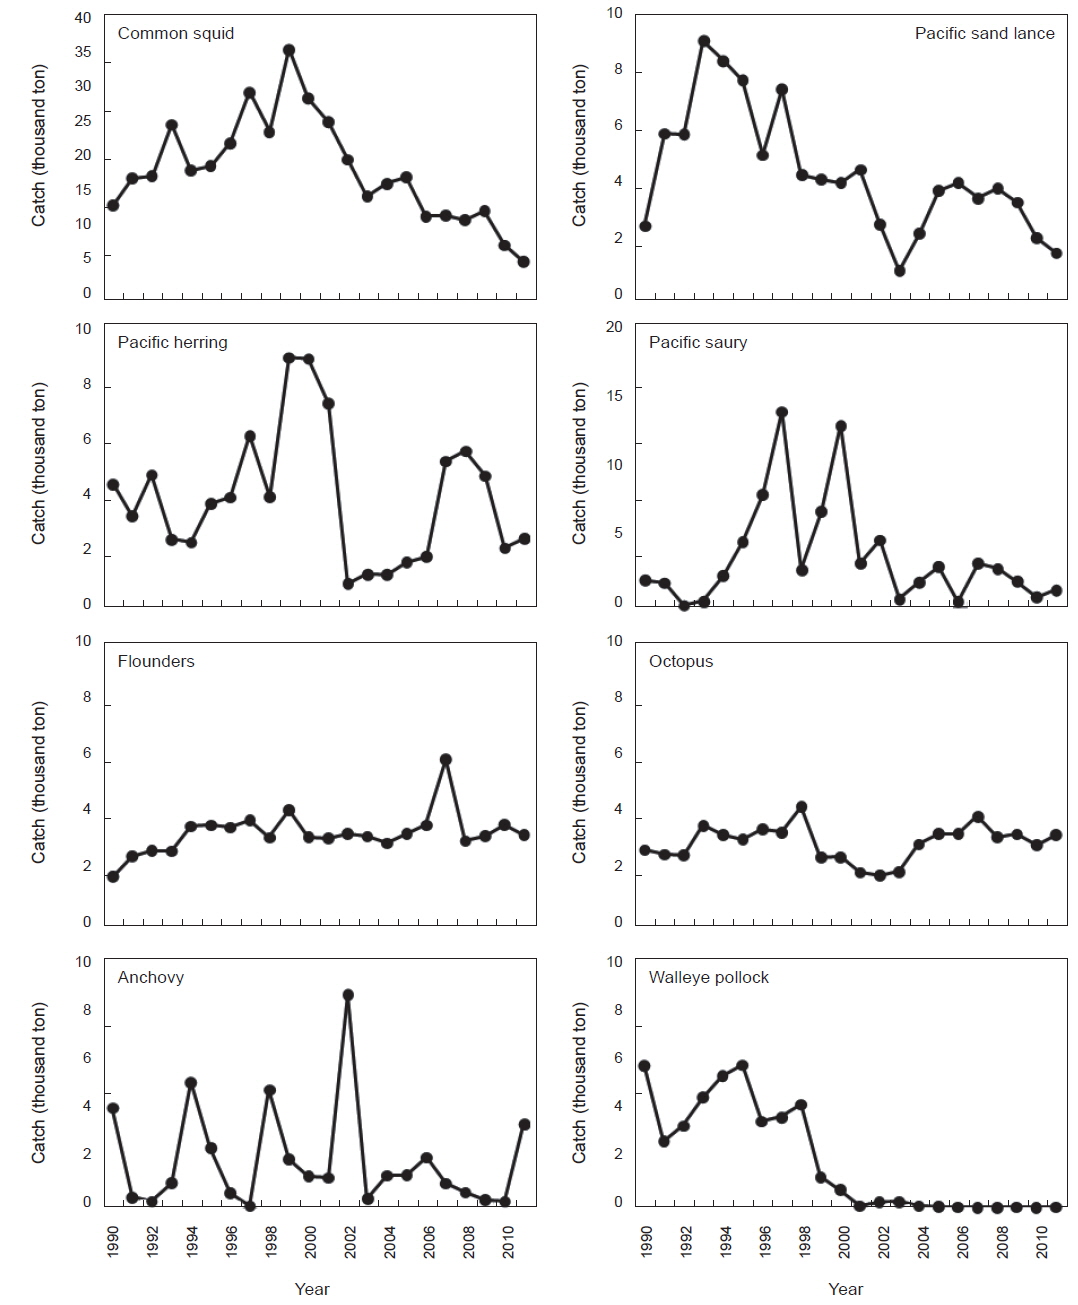 Variations in catch by species caught by coastal fisheries in the Ease Sea from 1990 to 2011.